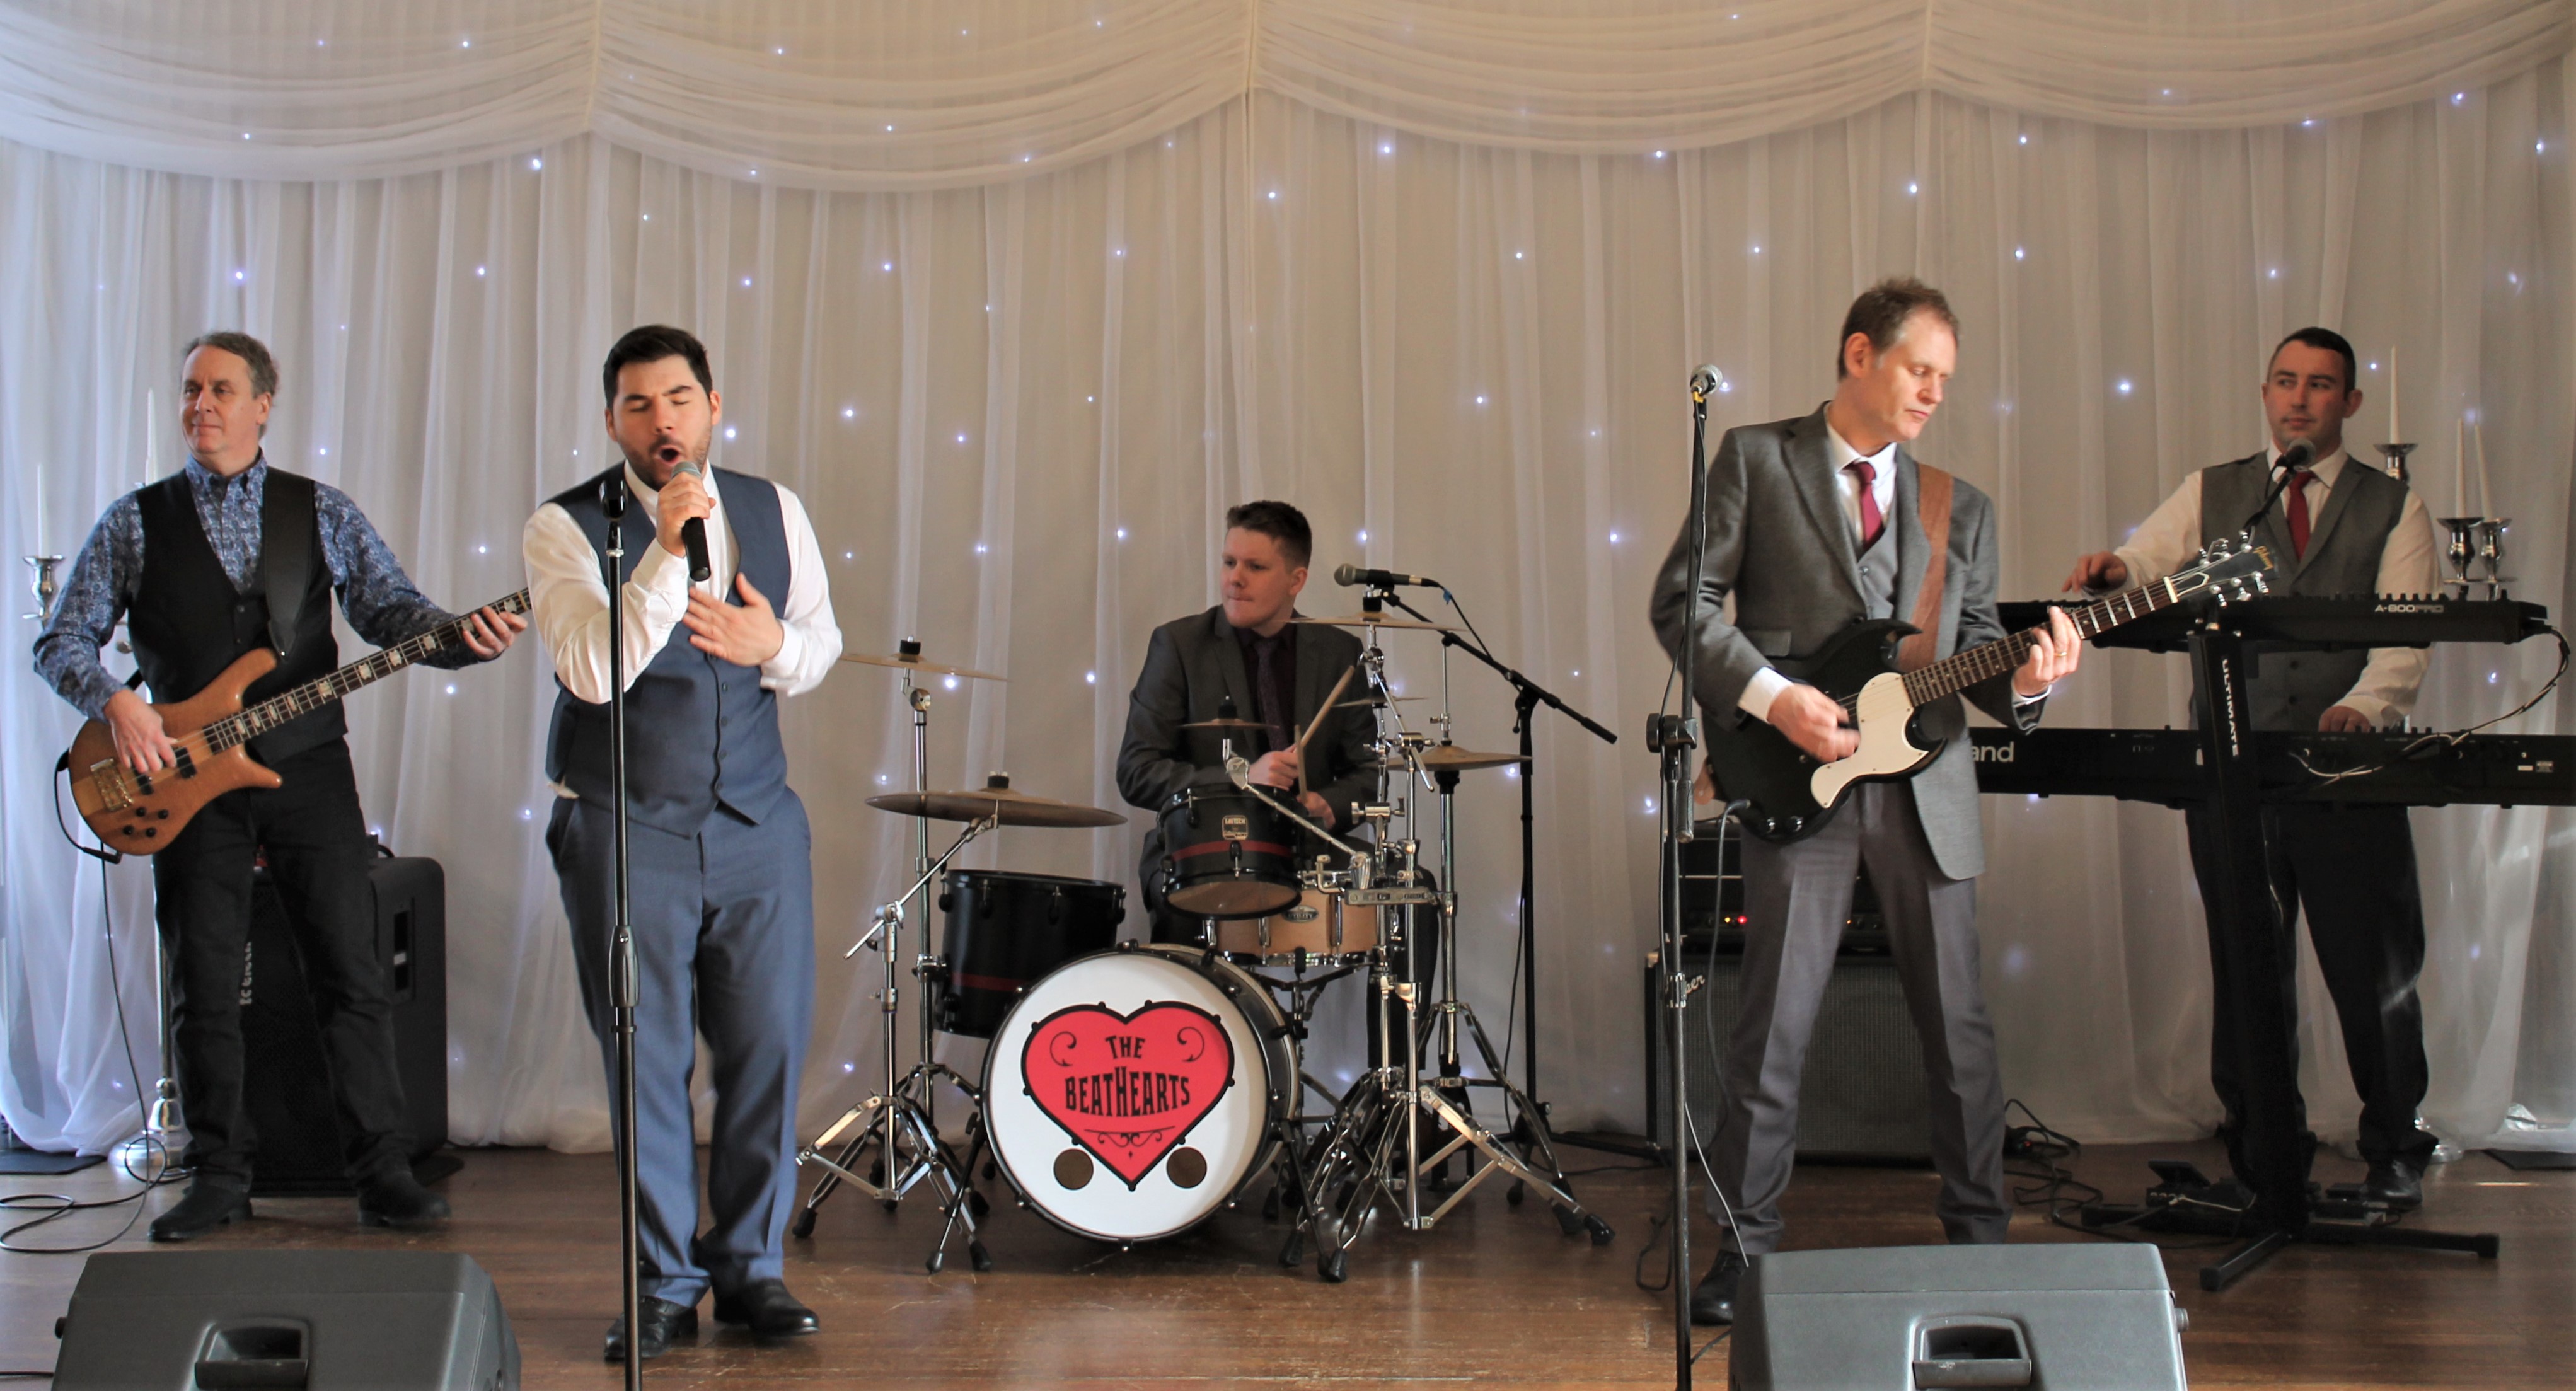 Wedding band, the Beathearts, in action.